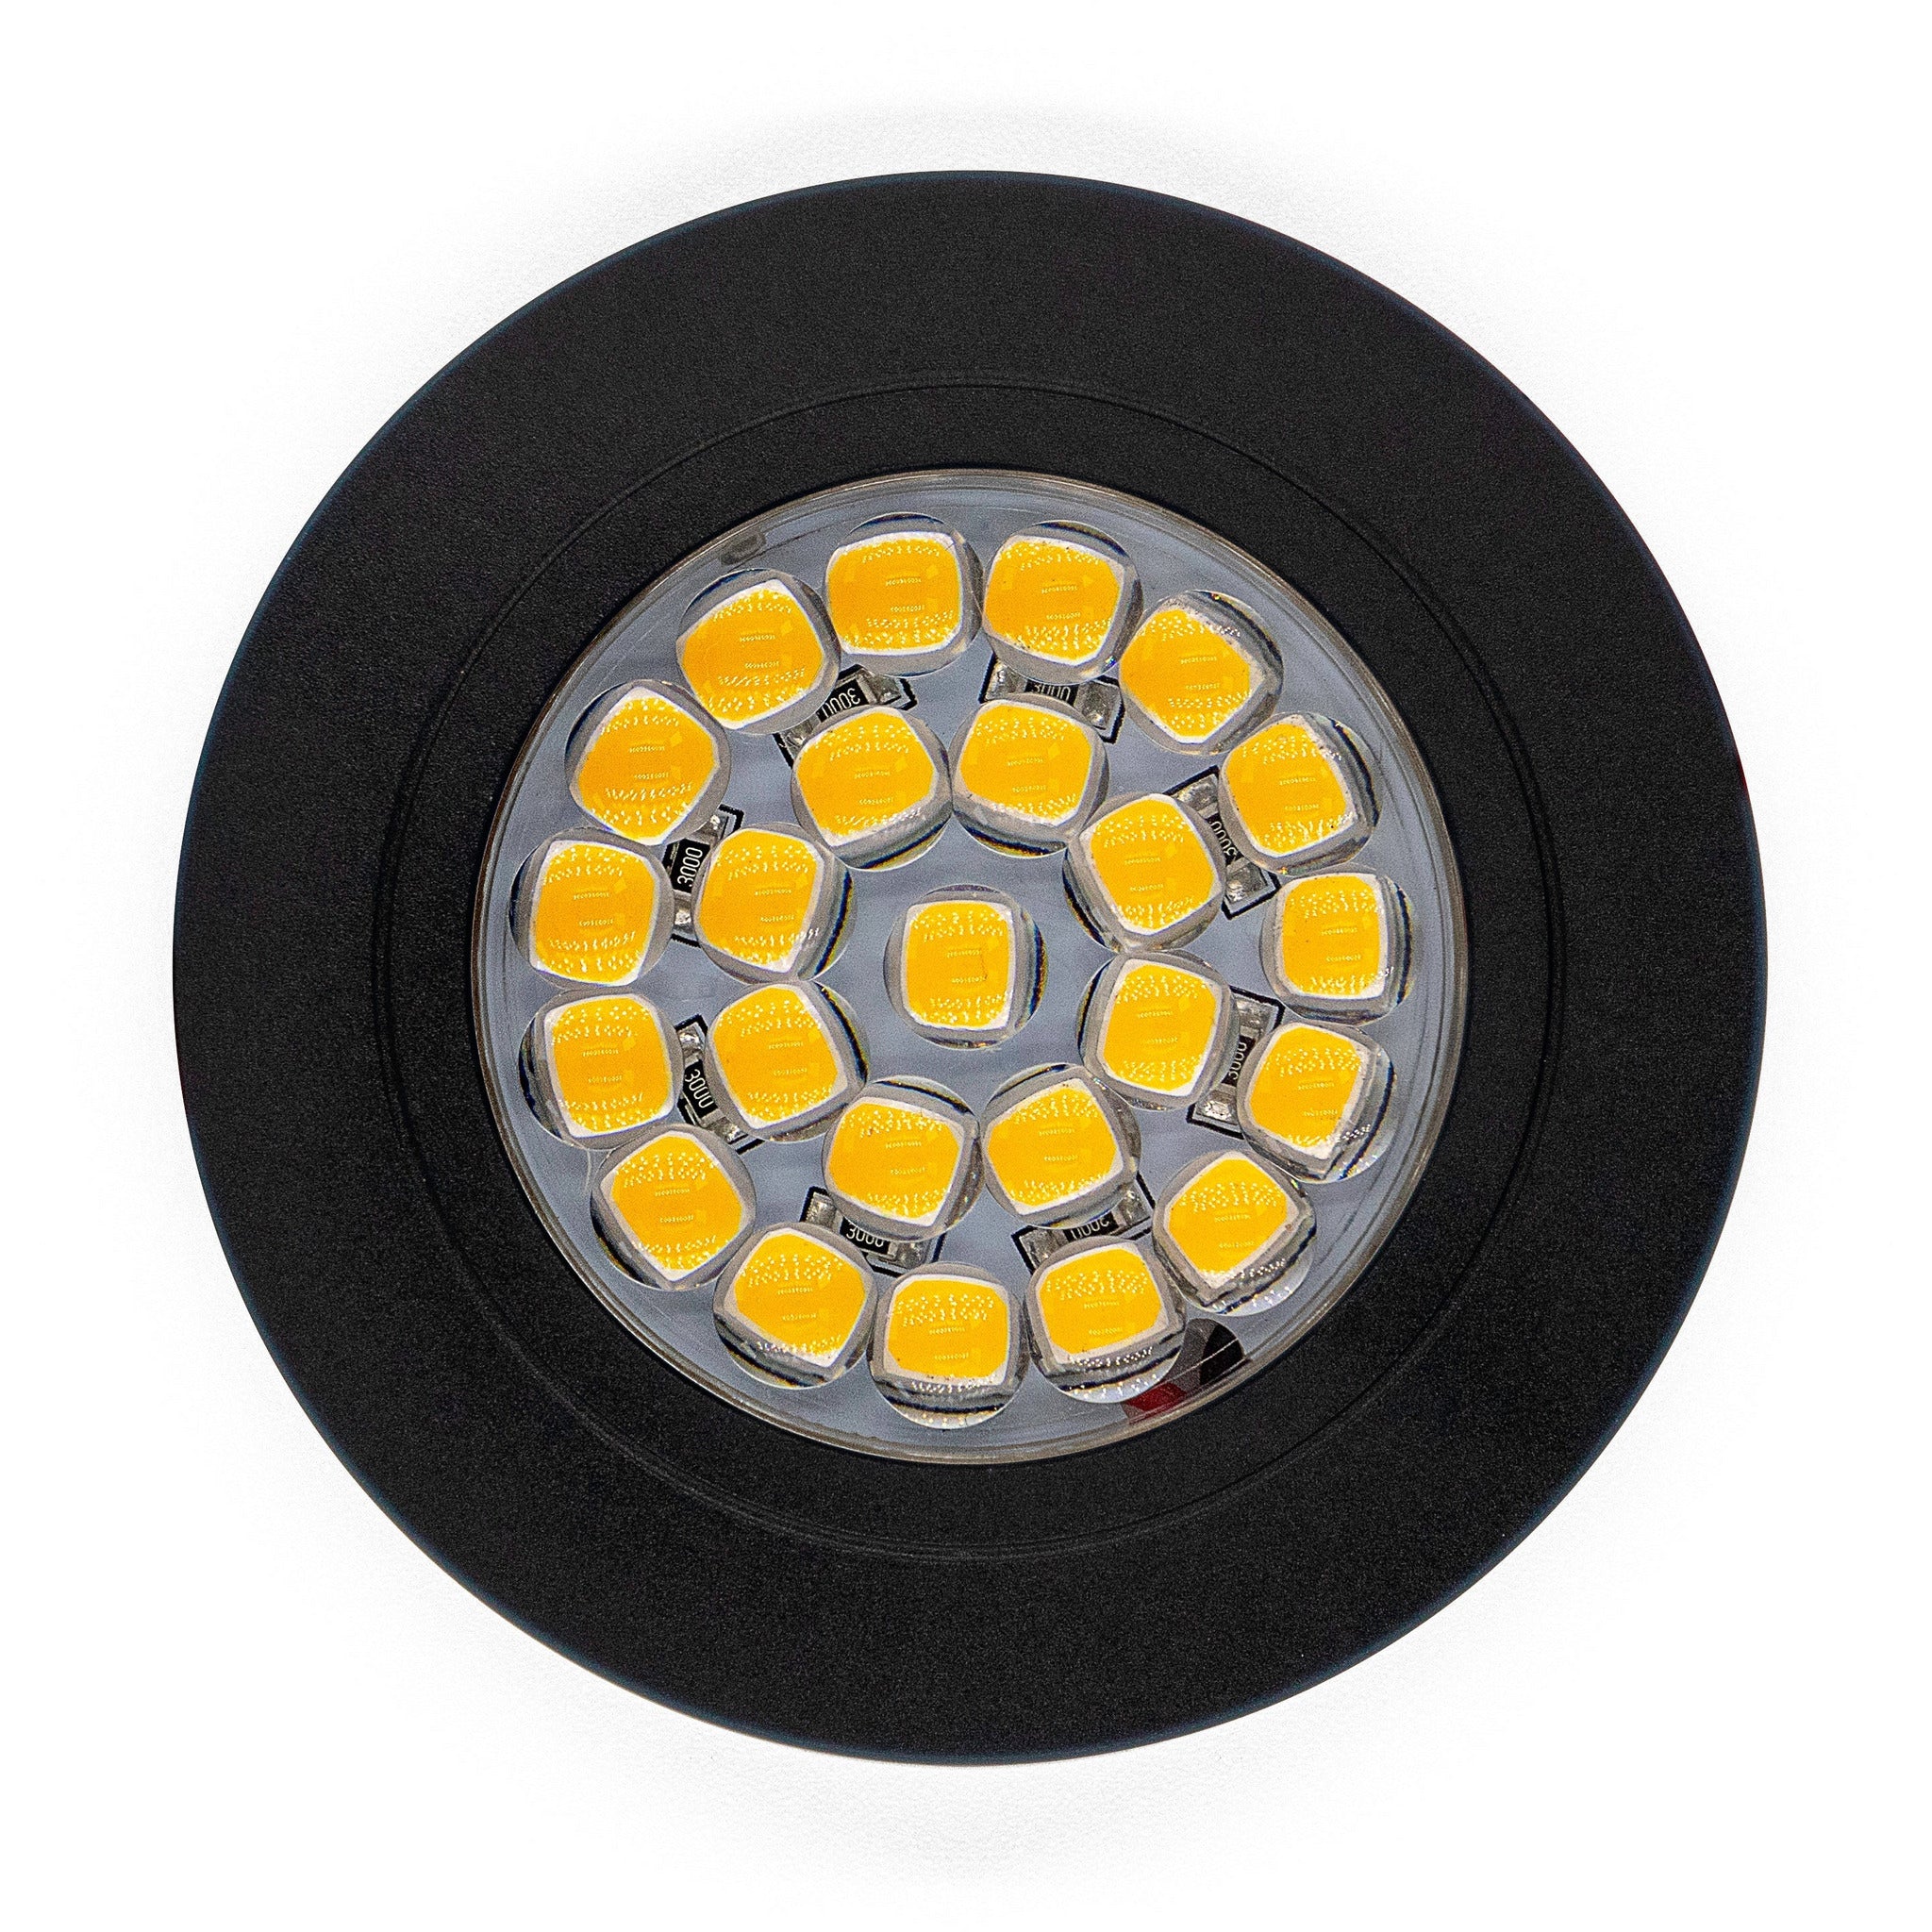 Black 2W 24 LED Recessed Light - Dimmable, Touch On/Off (Warm White) Kiravans 